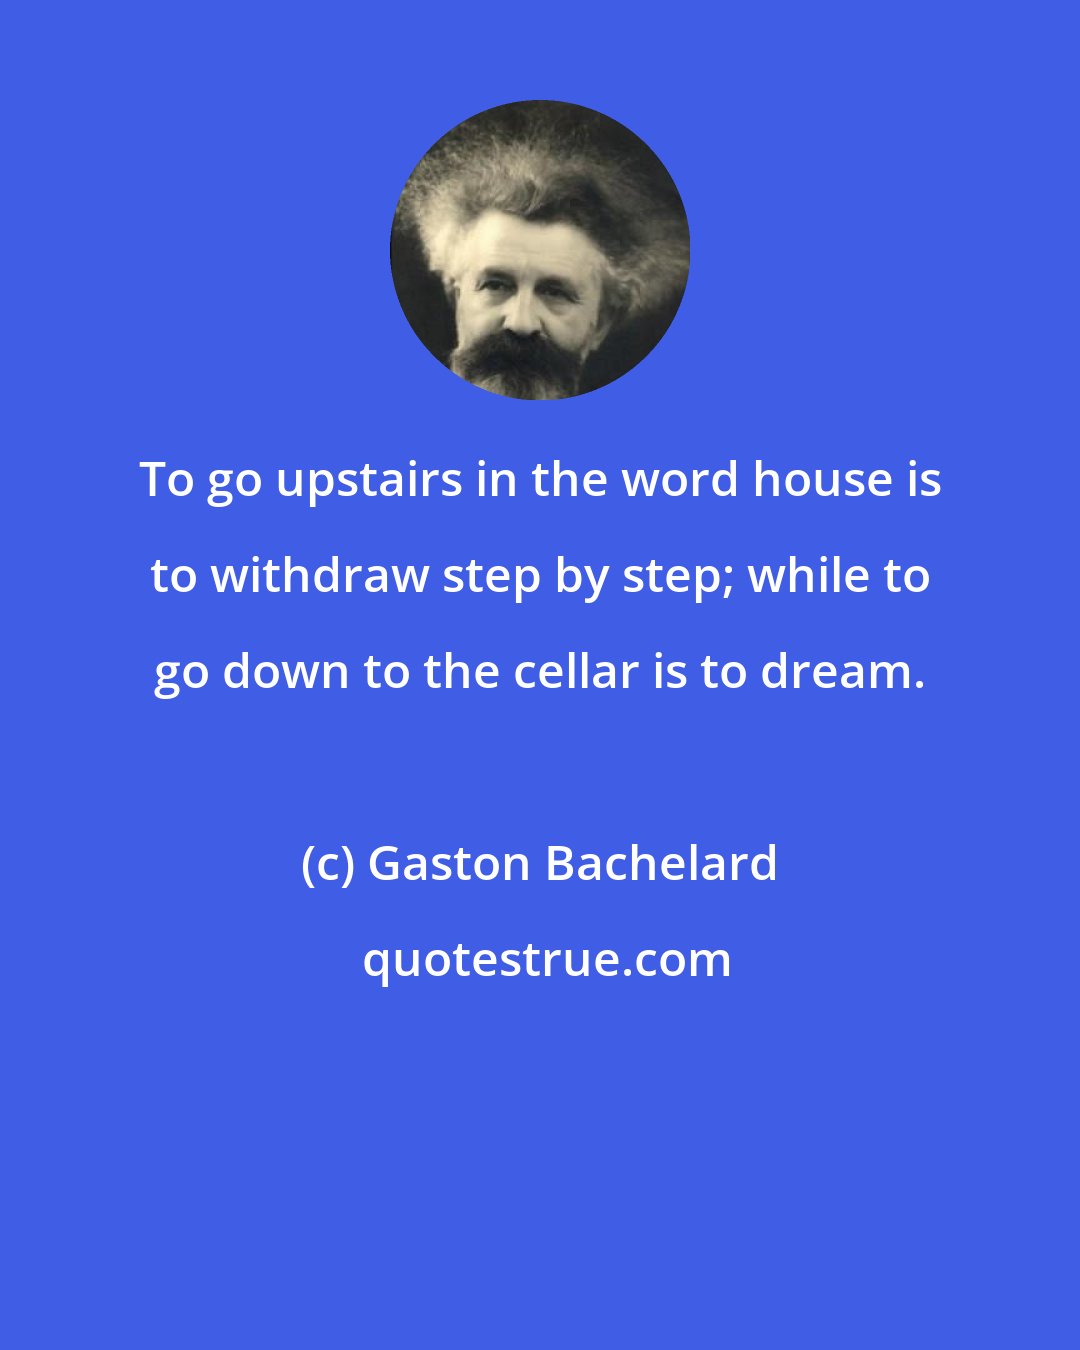 Gaston Bachelard: To go upstairs in the word house is to withdraw step by step; while to go down to the cellar is to dream.